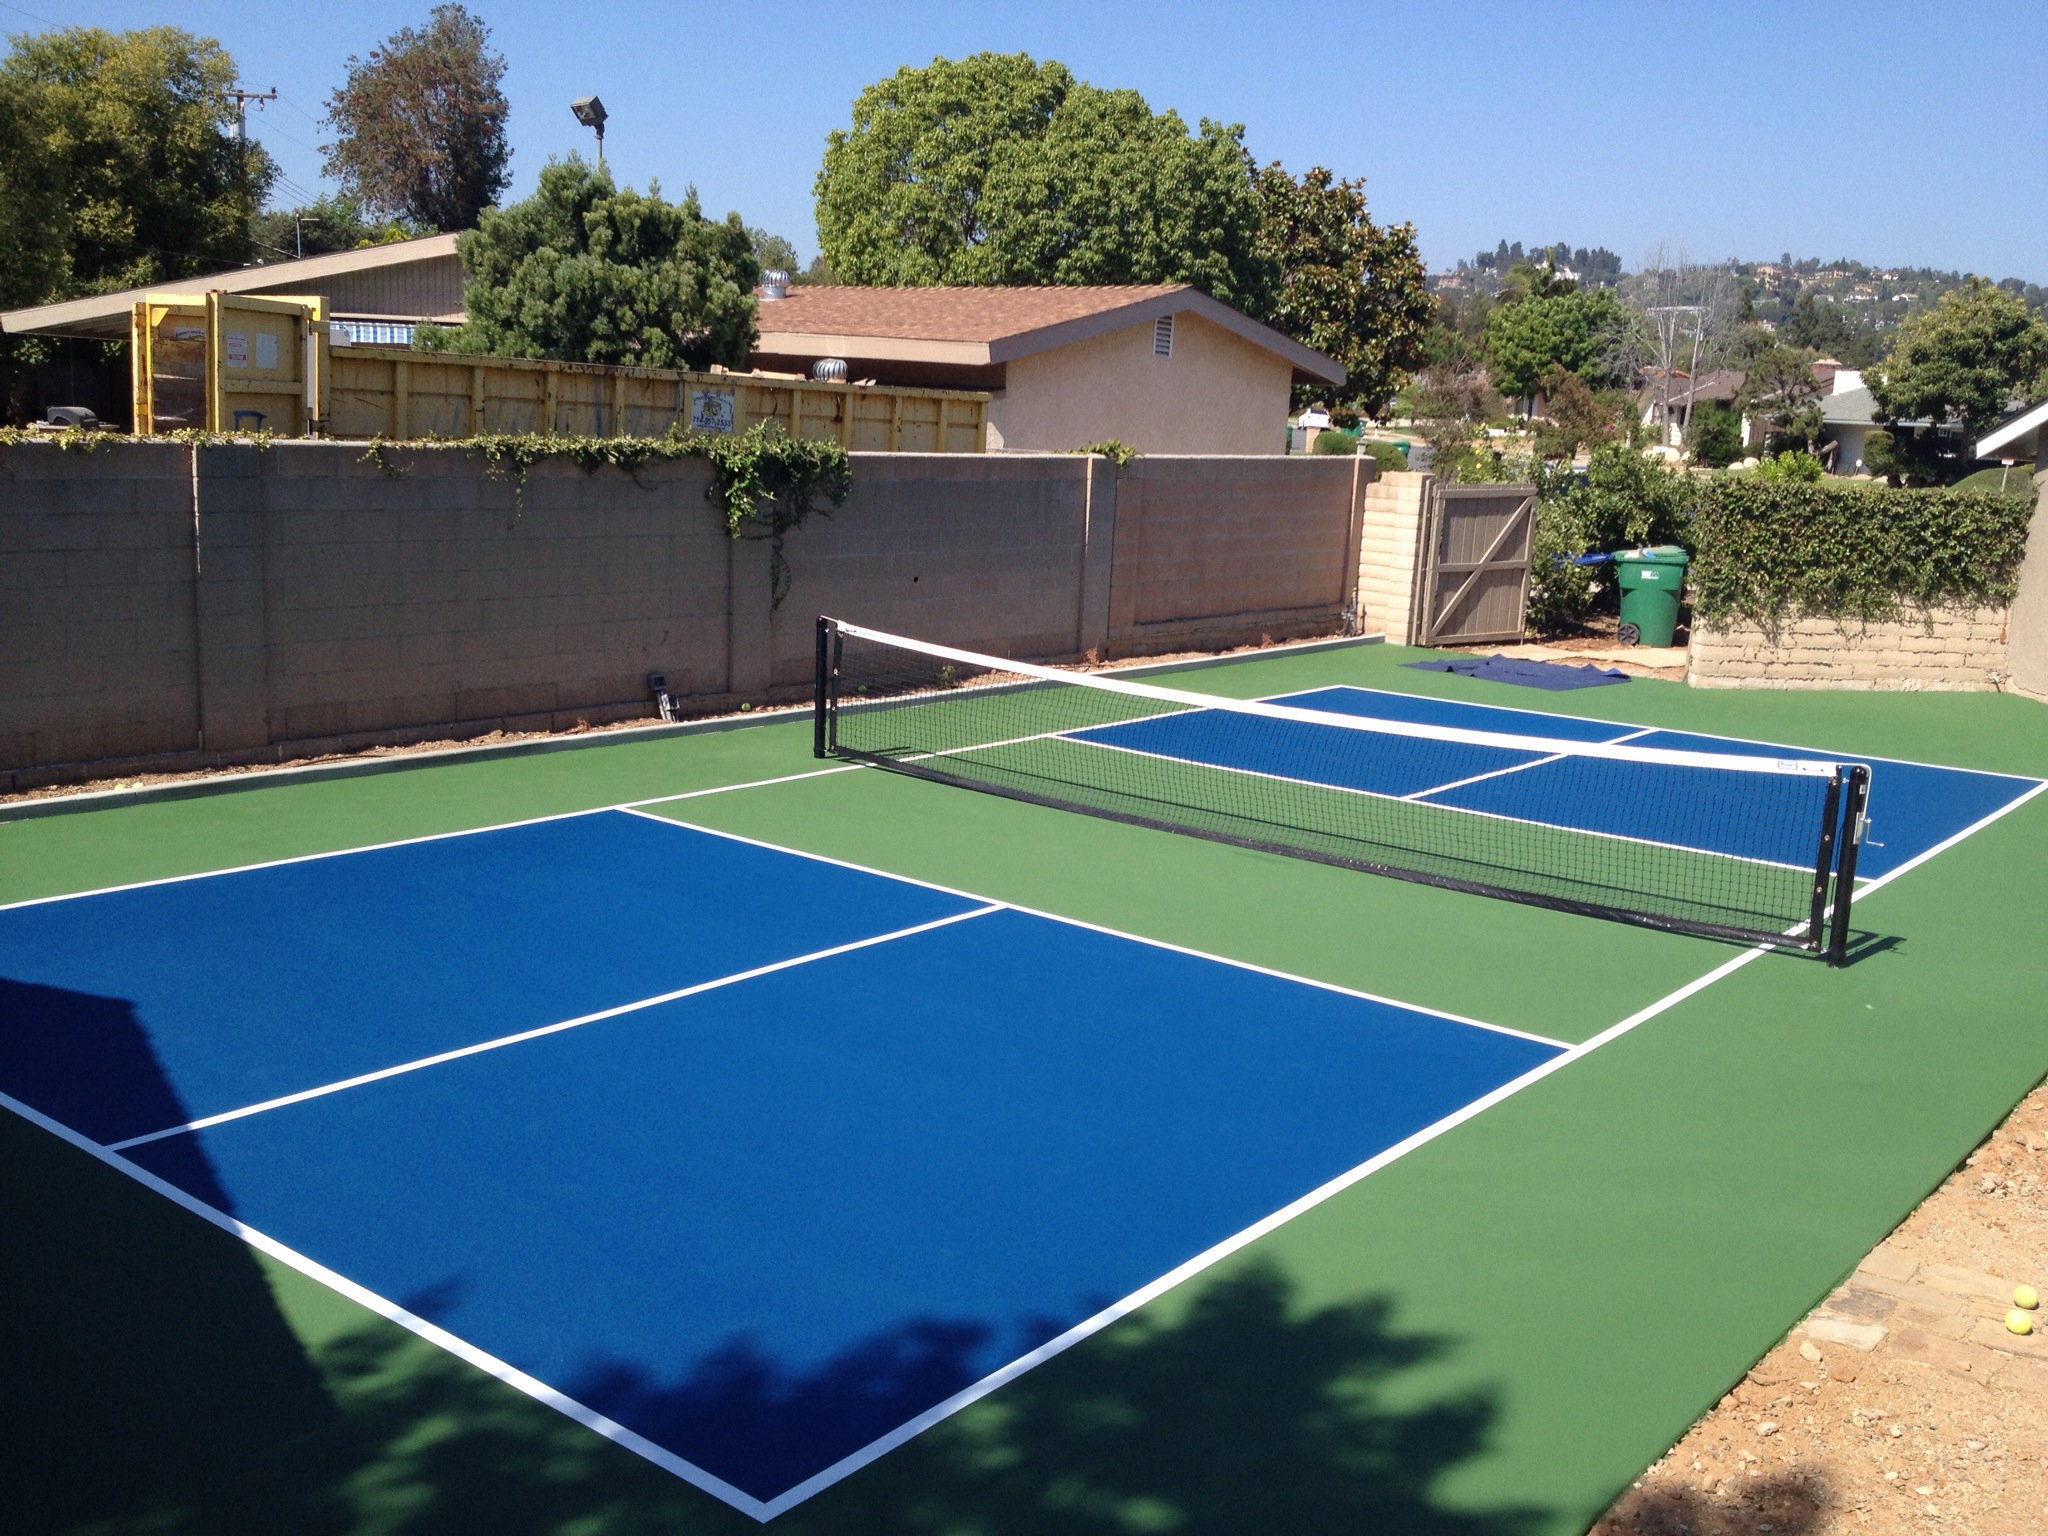 Can Pickleball Be Played On A Tennis Court?